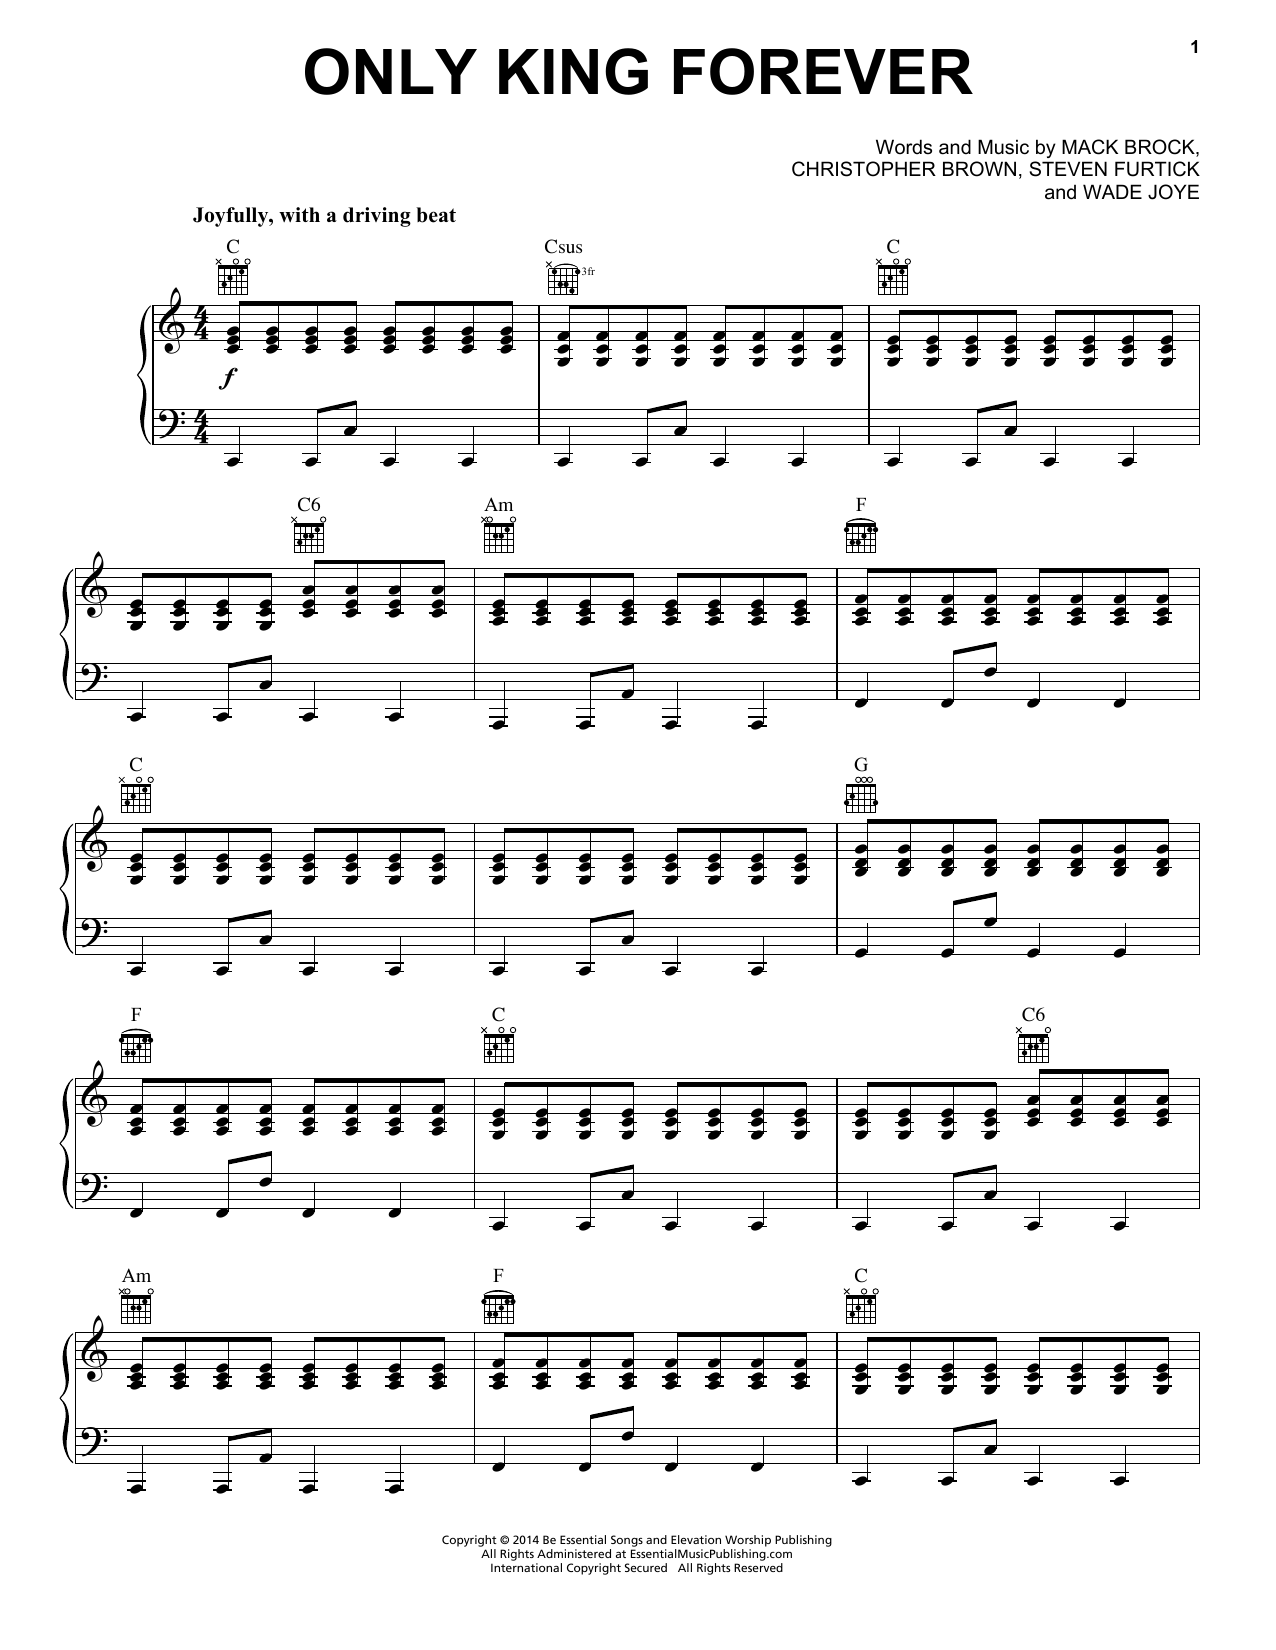 Elevation Worship Only King Forever sheet music notes and chords. Download Printable PDF.